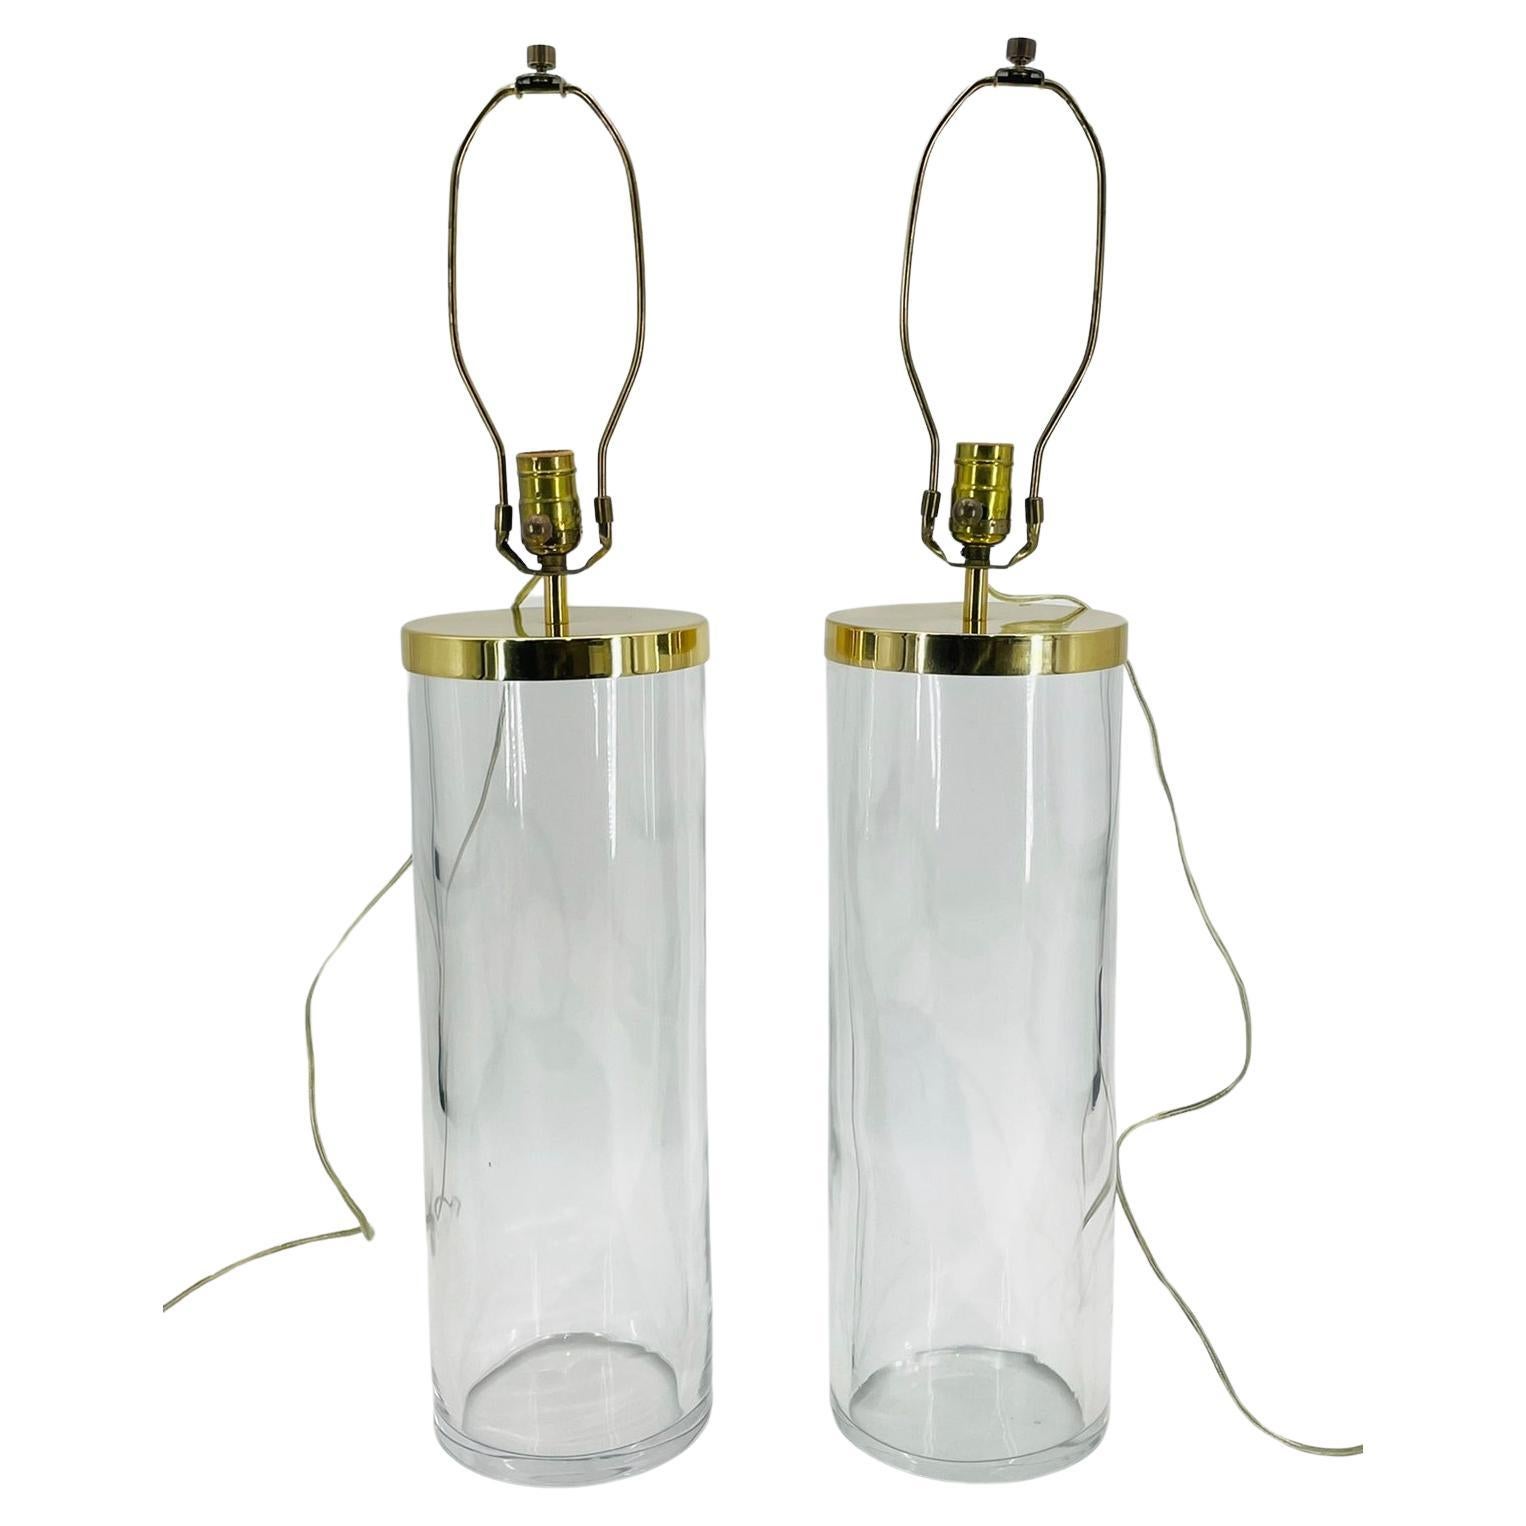 Introducing the Vintage Pair of Glass & Brass Table Lamps by Chapman, USA, hailing all the way from the sophisticated 1970's era. These exquisite lamps exude timeless elegance and will effortlessly enhance any space with their impeccable